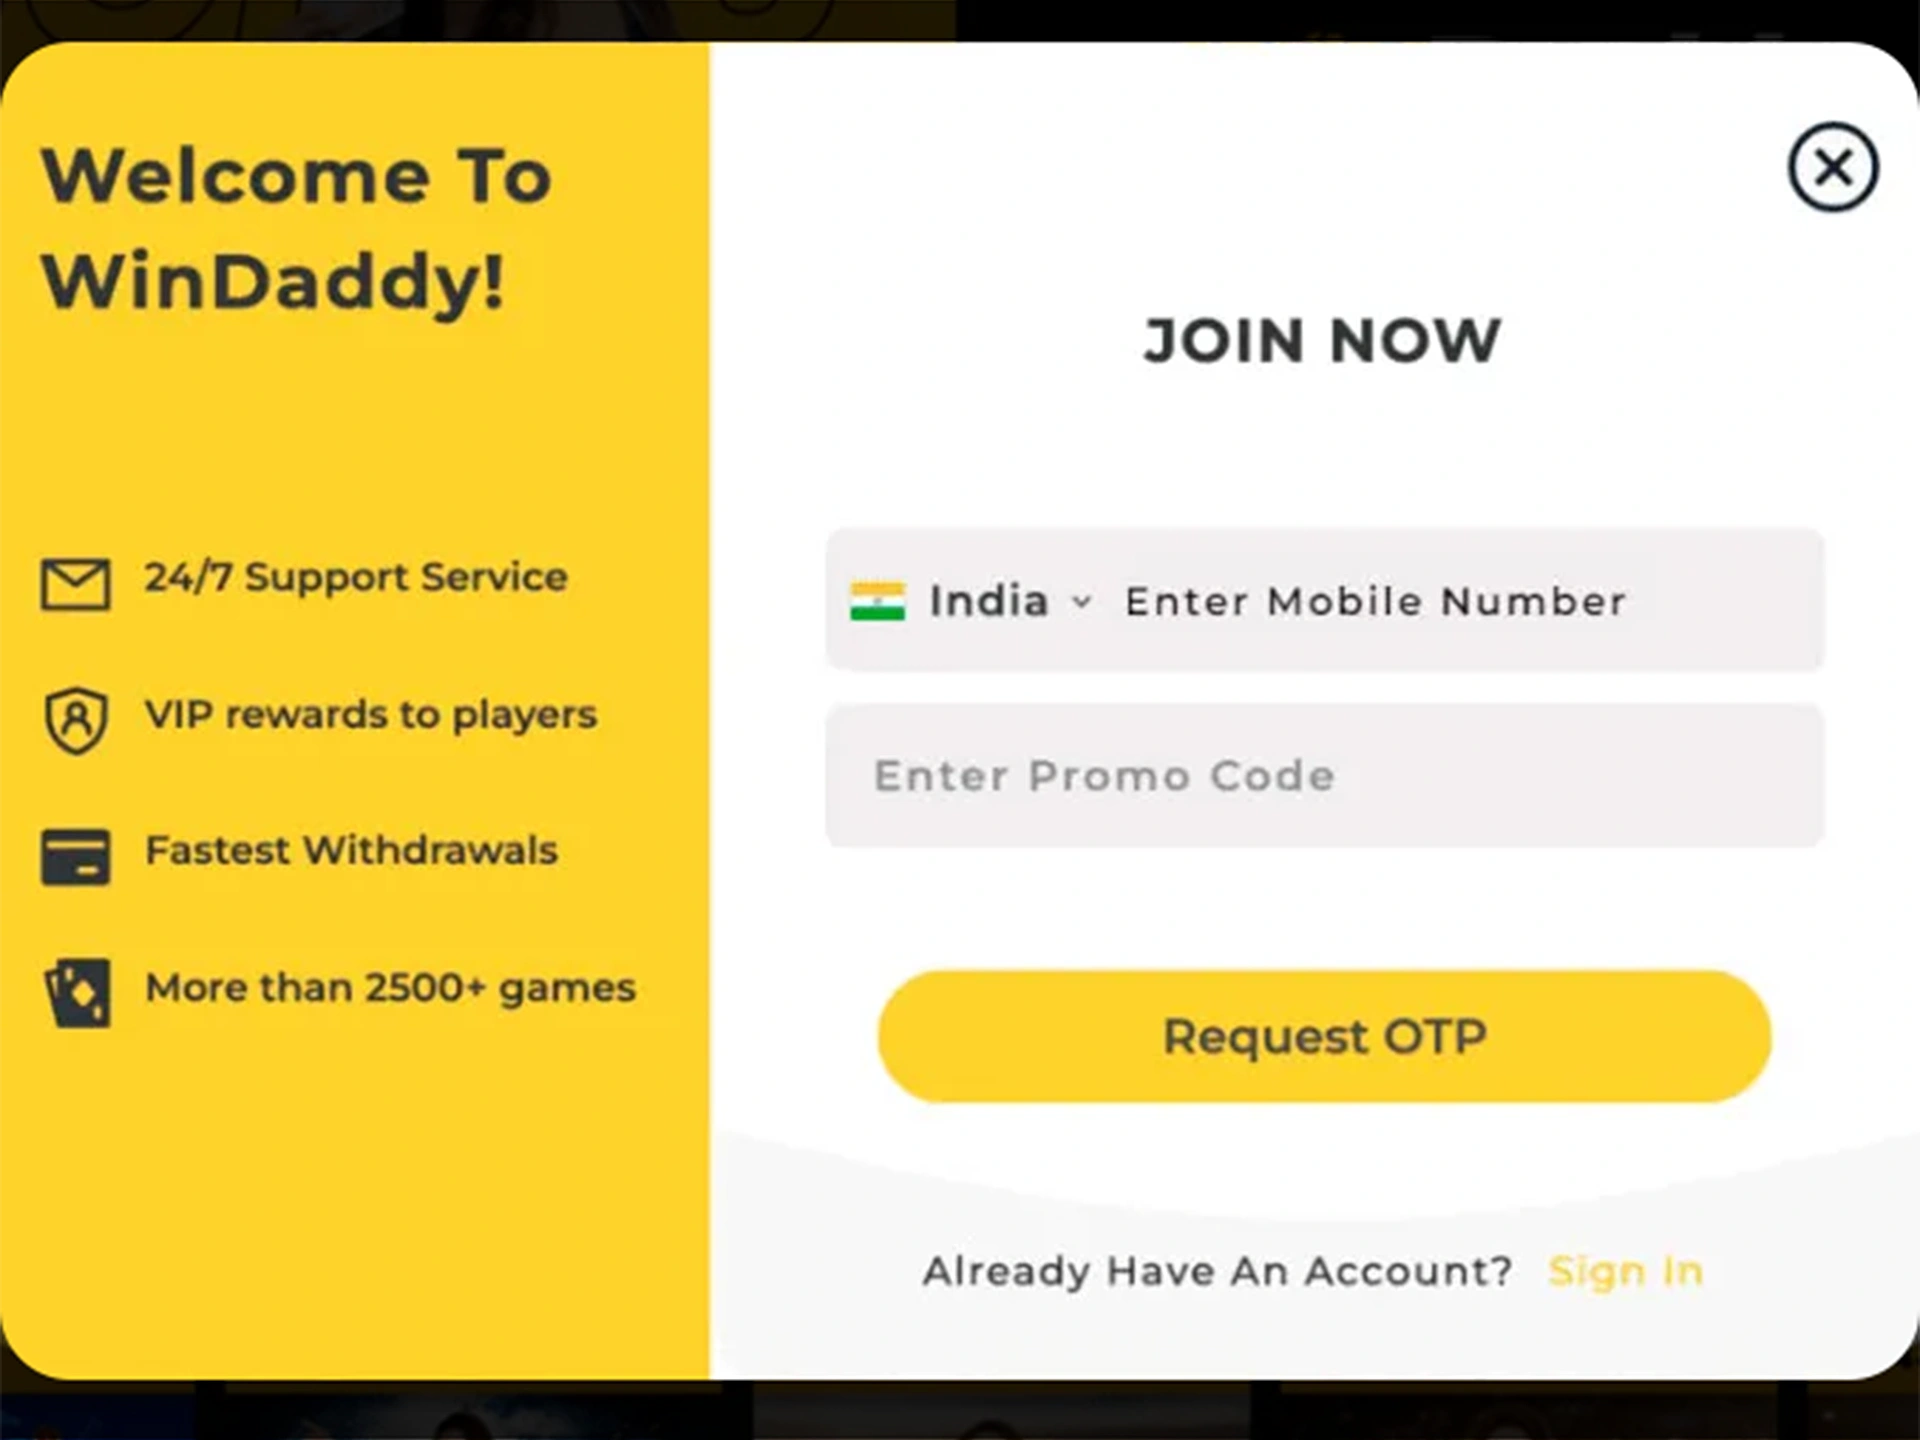 Fill out the registration form to create a Windaddy account.